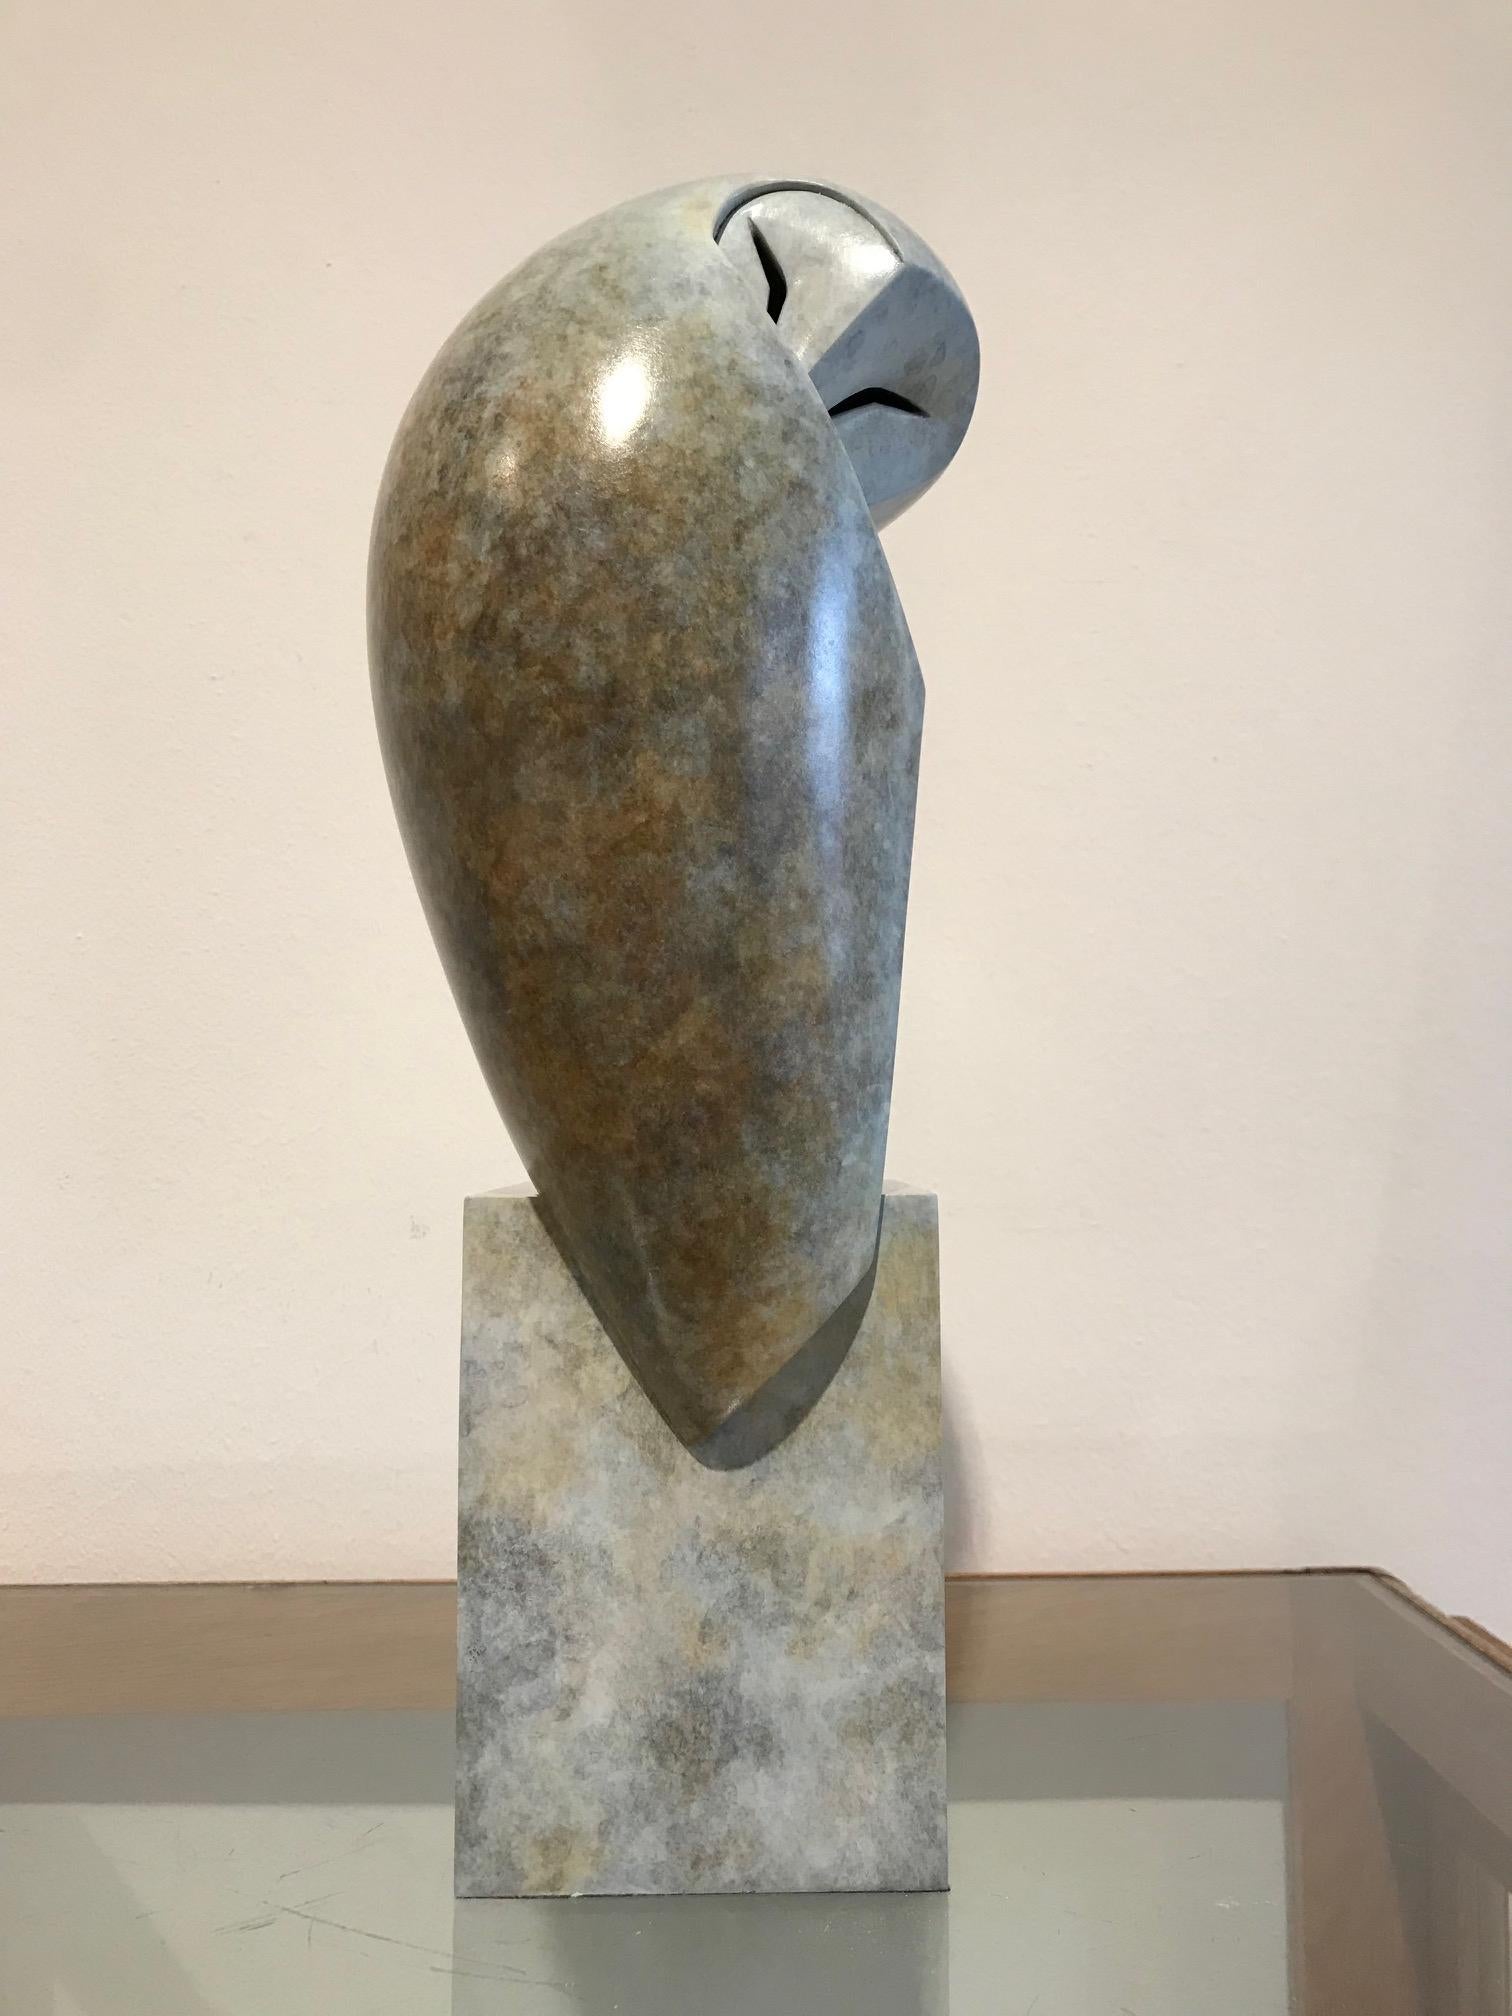 British sculptor Anthony Theakston (1965), who draws his inspiration from the shape and movement of birds, simplifies the birds and omits more and more details until only the essence of the animal remains. The stylized birds are reduced to a